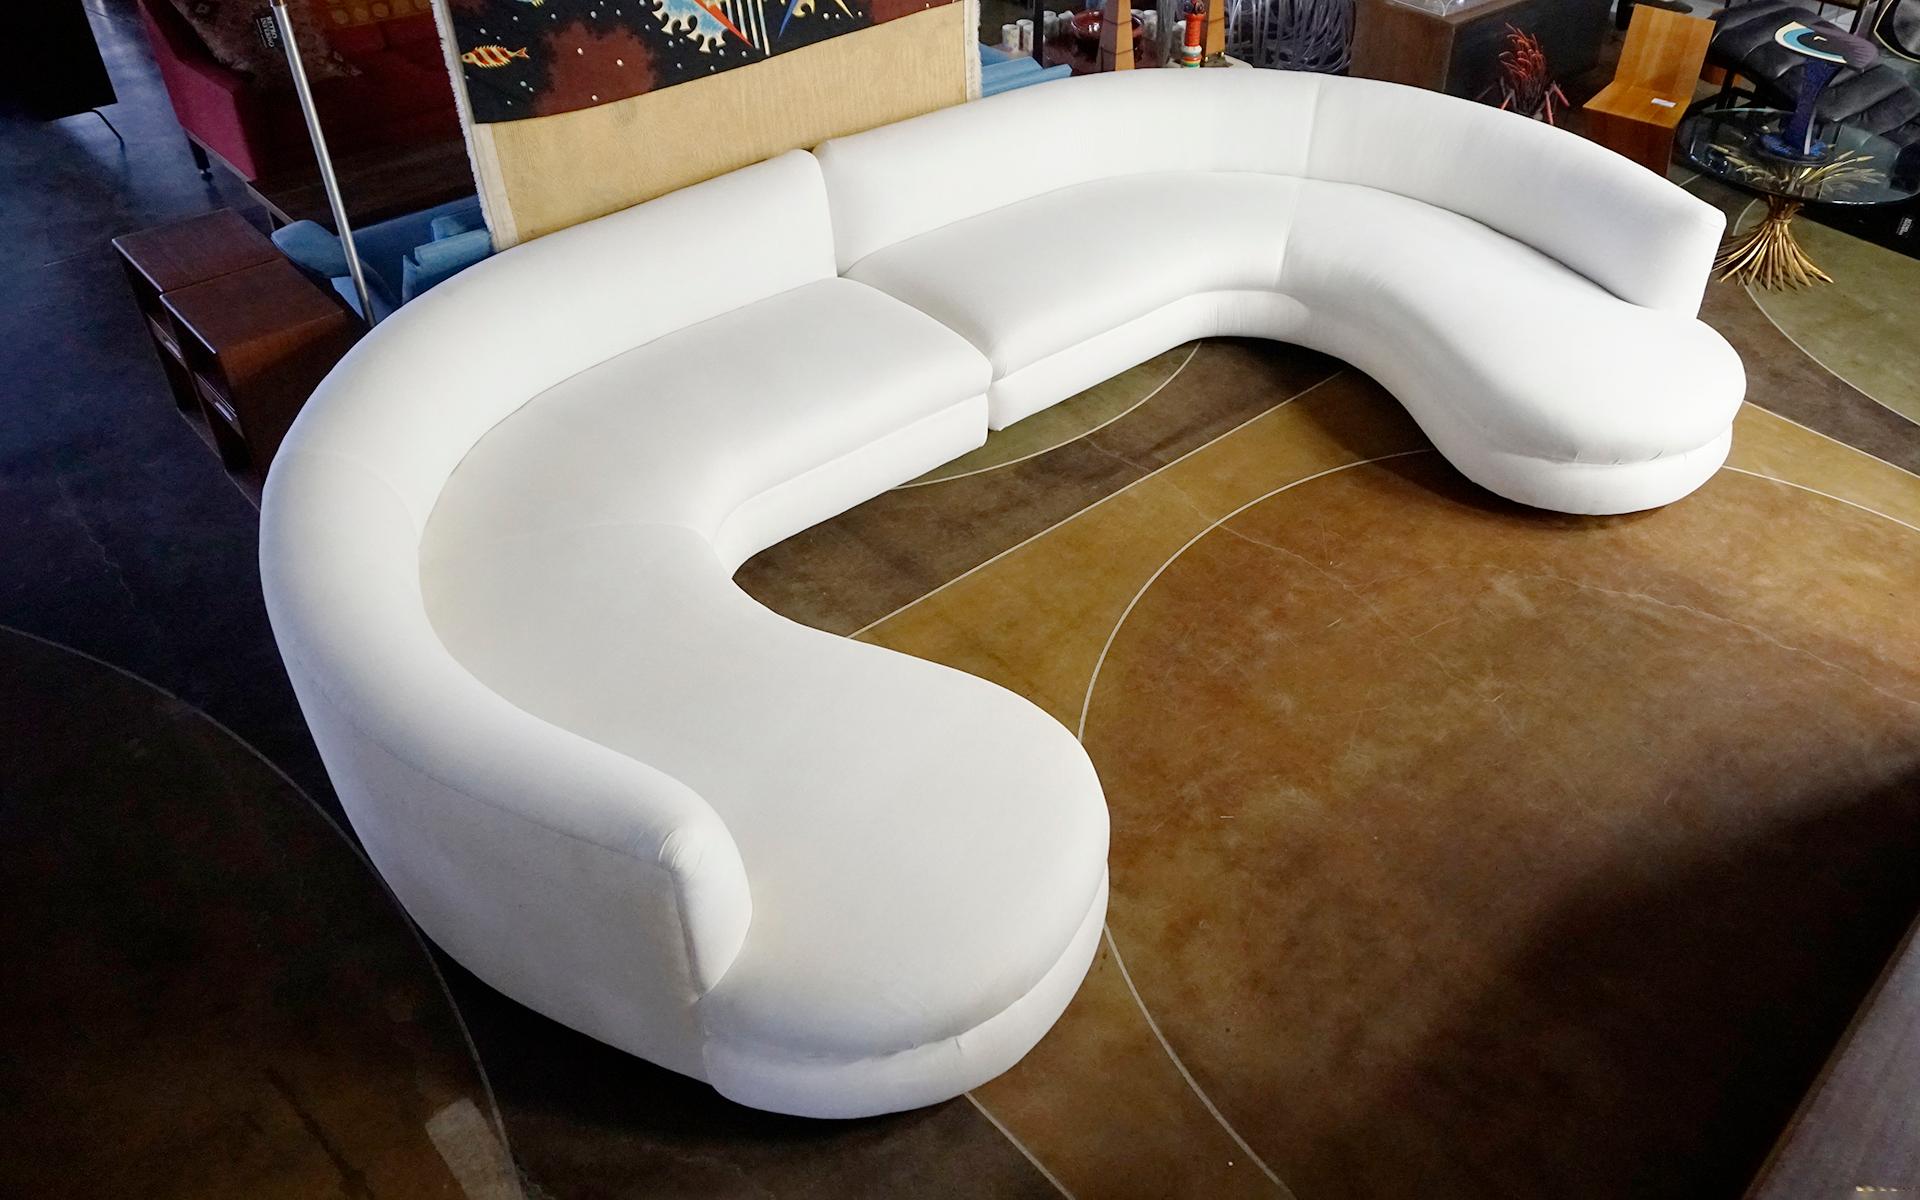 Large two piece curved white cloud sofa in the style of Vladimir Kagan for Directional.  We are unsure of the designer or manufacturer, but the sofa is very high quality construction and in very good condition.  There are areas of yellowing to the